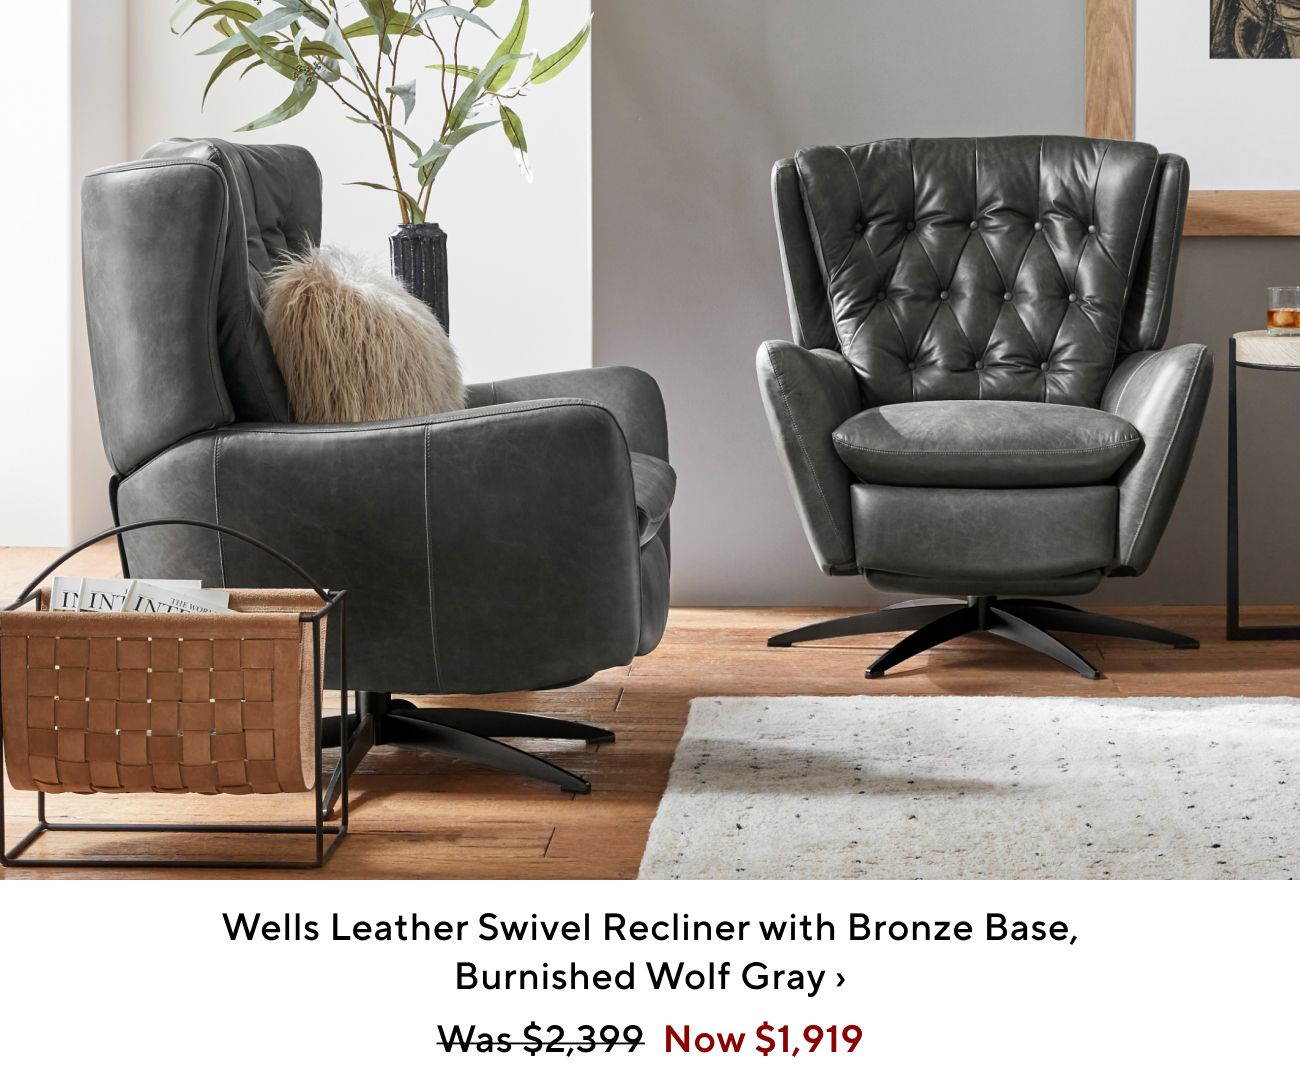 Wells Leather Swivel Recliner with Bronze Base, Burnished Wolf Gray Was$2.399 Now $1,919 